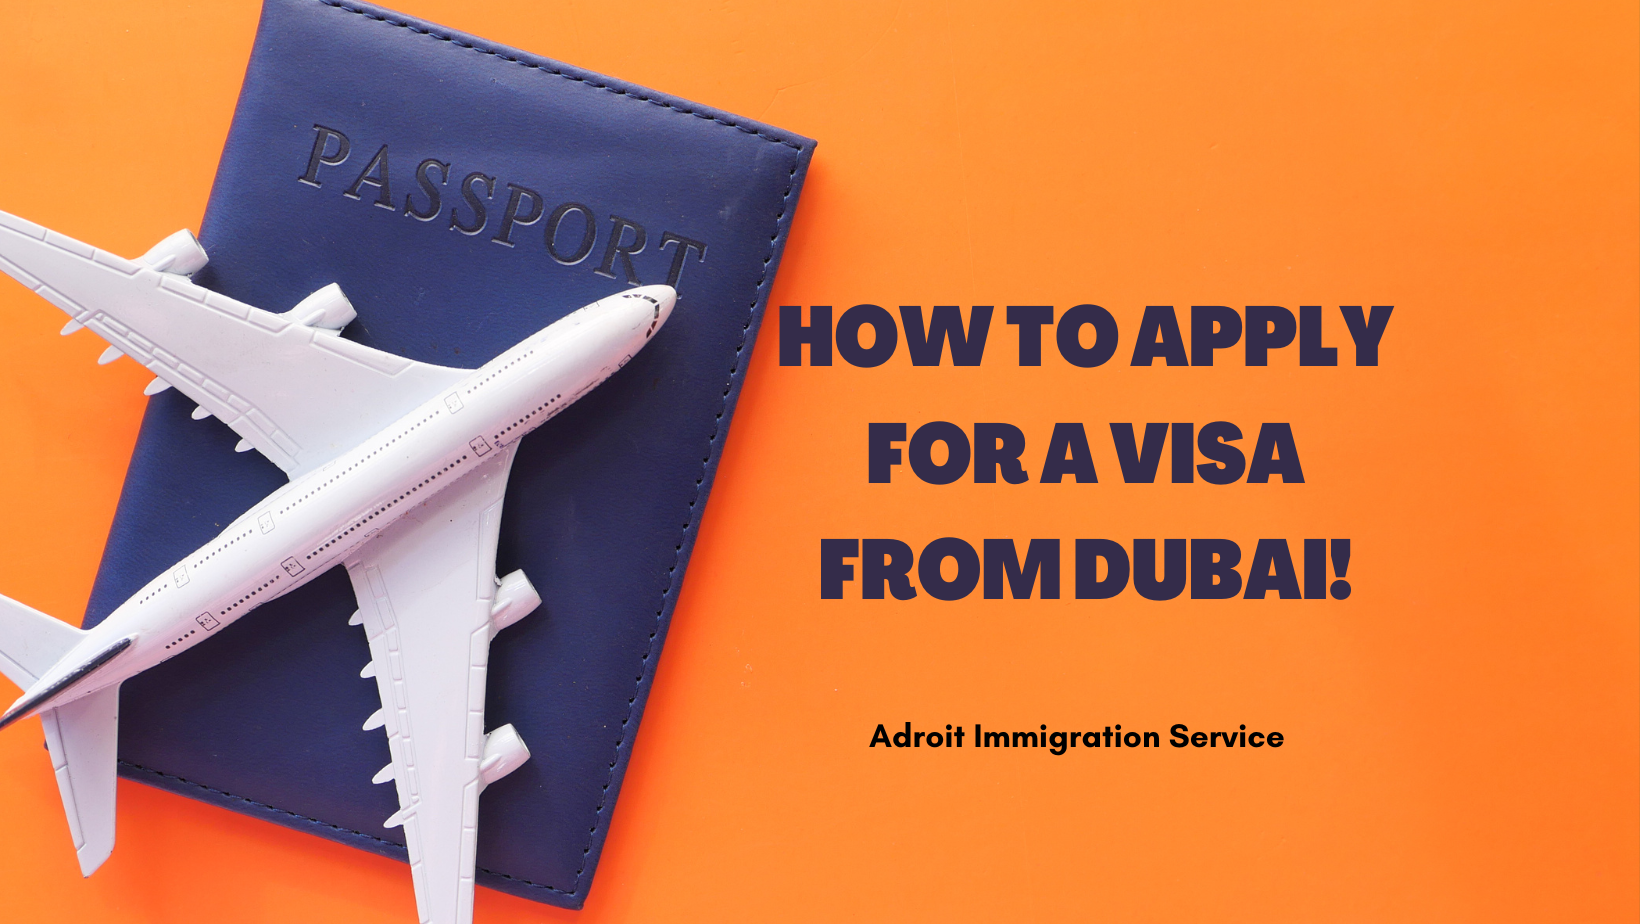 How To Apply For a Visa From Dubai